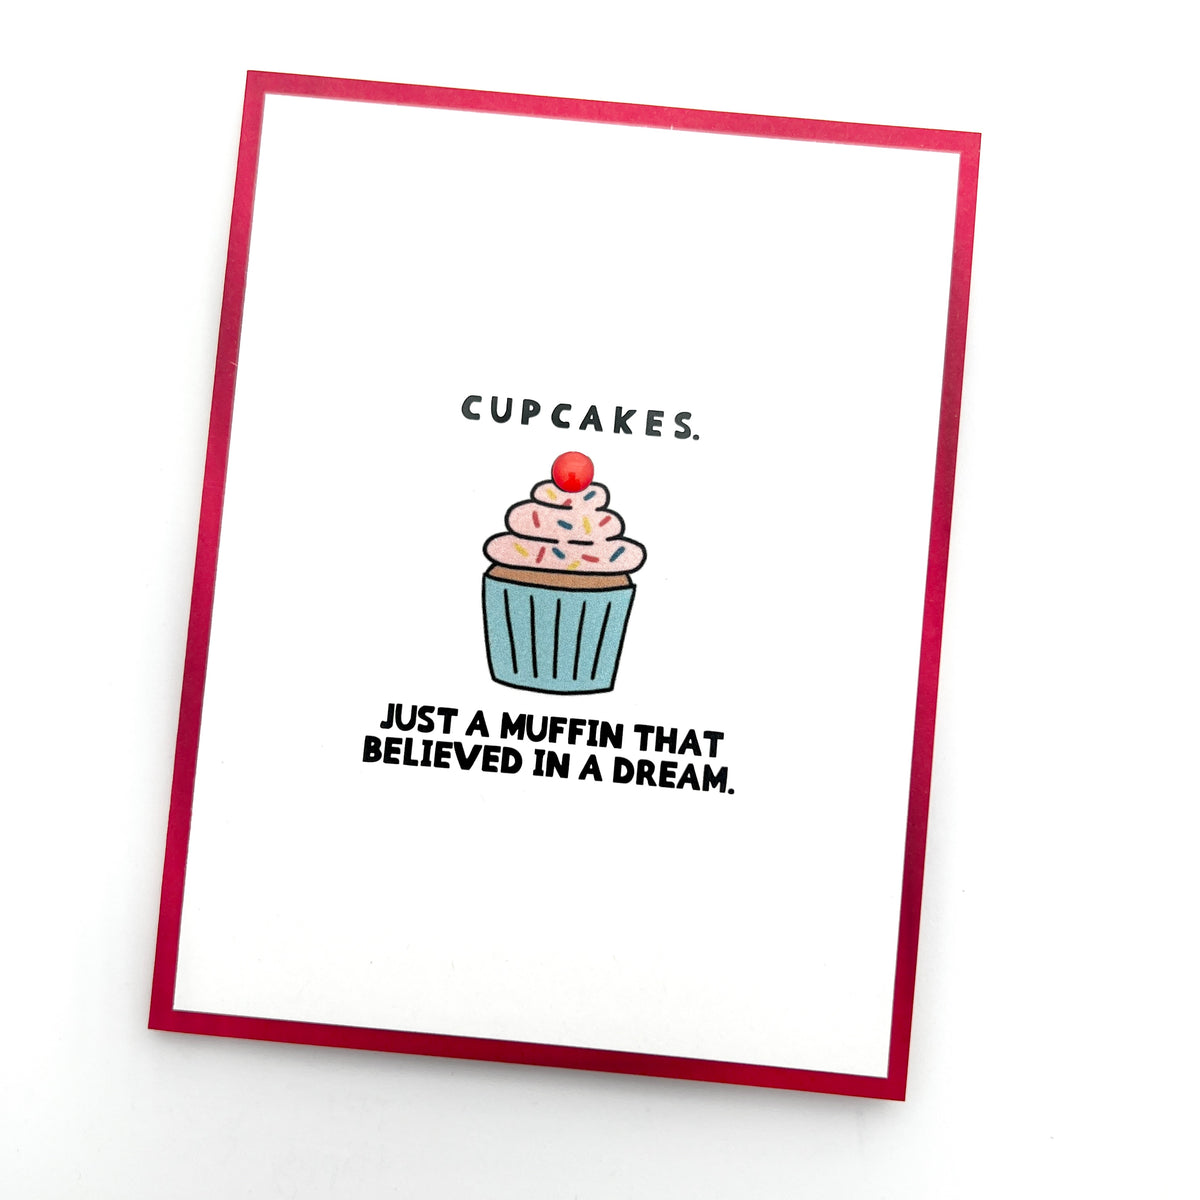 Funny Cupcakes Muffin Believed in a Dream card